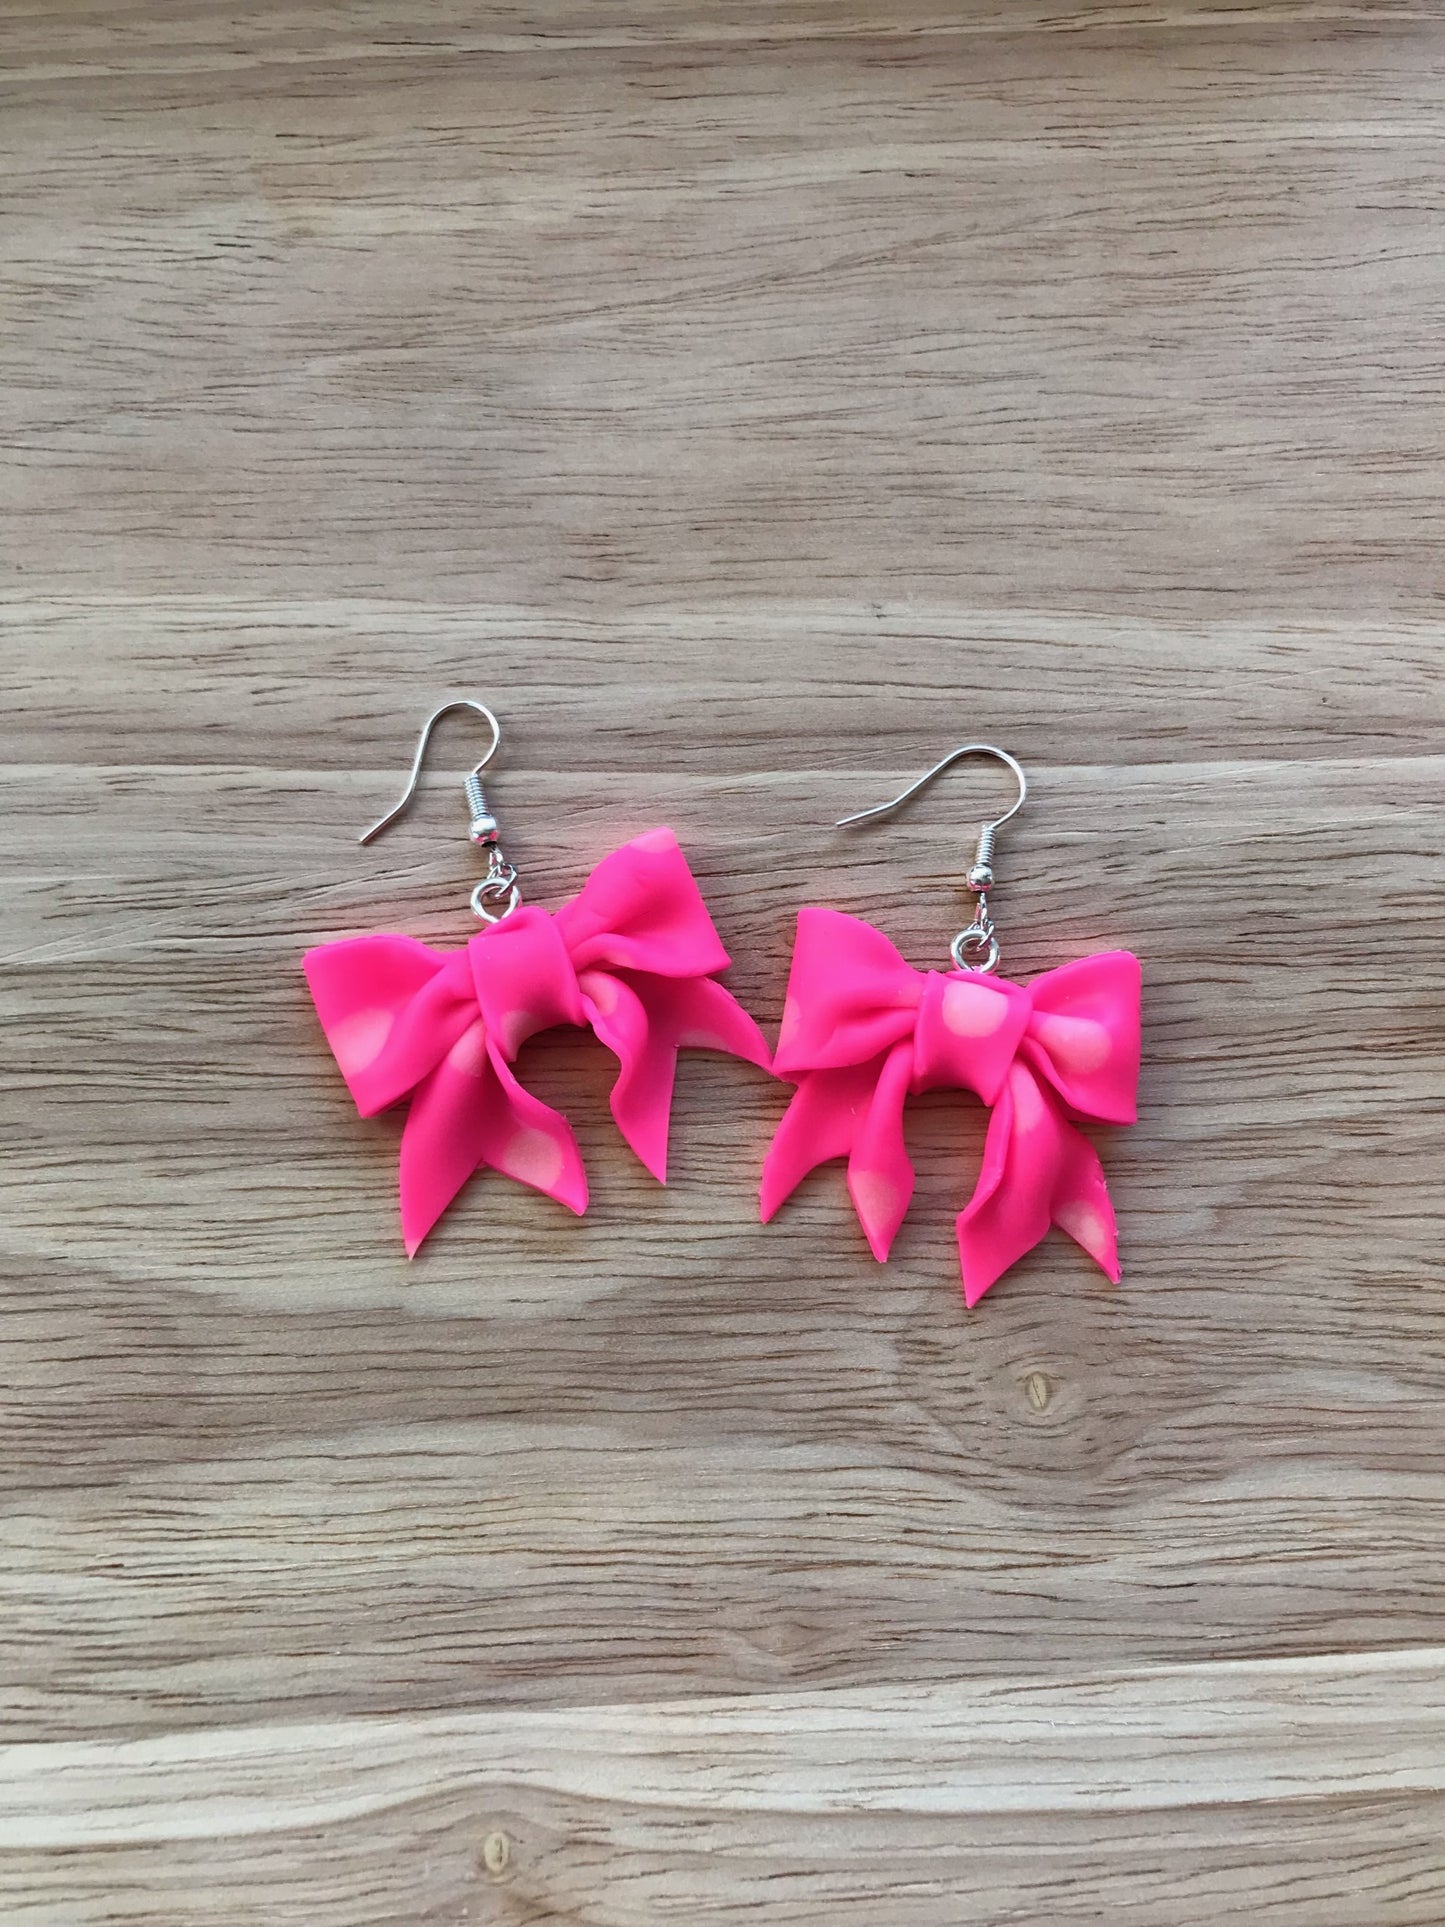 V-Day neon-pink bows with glow-in-the-dark dots